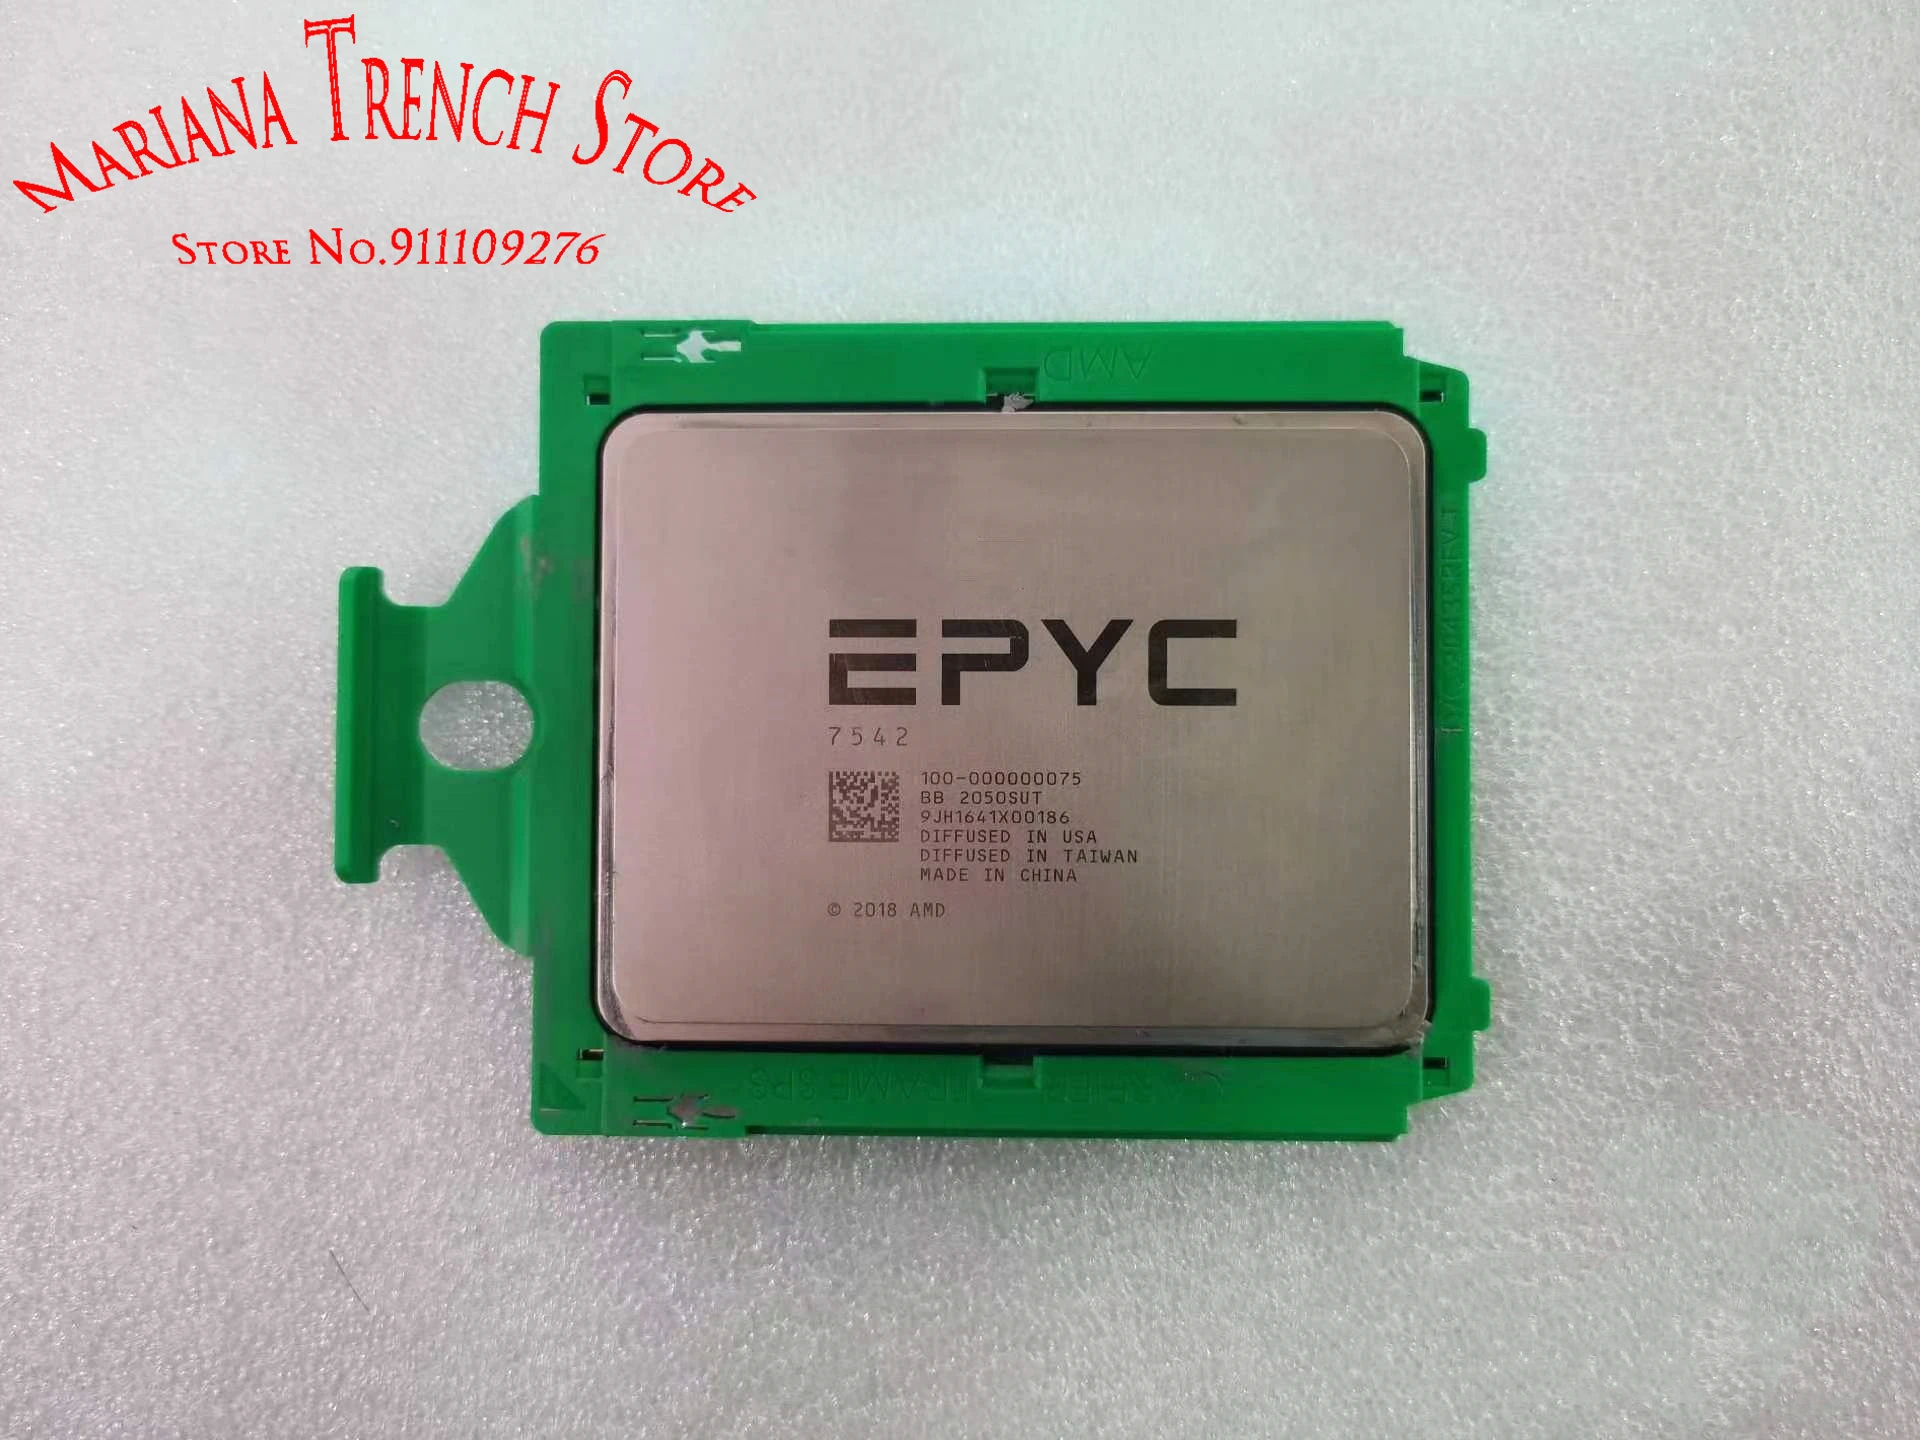 

CPU for EPYC 7542 32 Cores 64 Threads Base Clock 2.9GHz Max.Boost Up to 3.4GHz L3 Cache 128MB TDP 225W